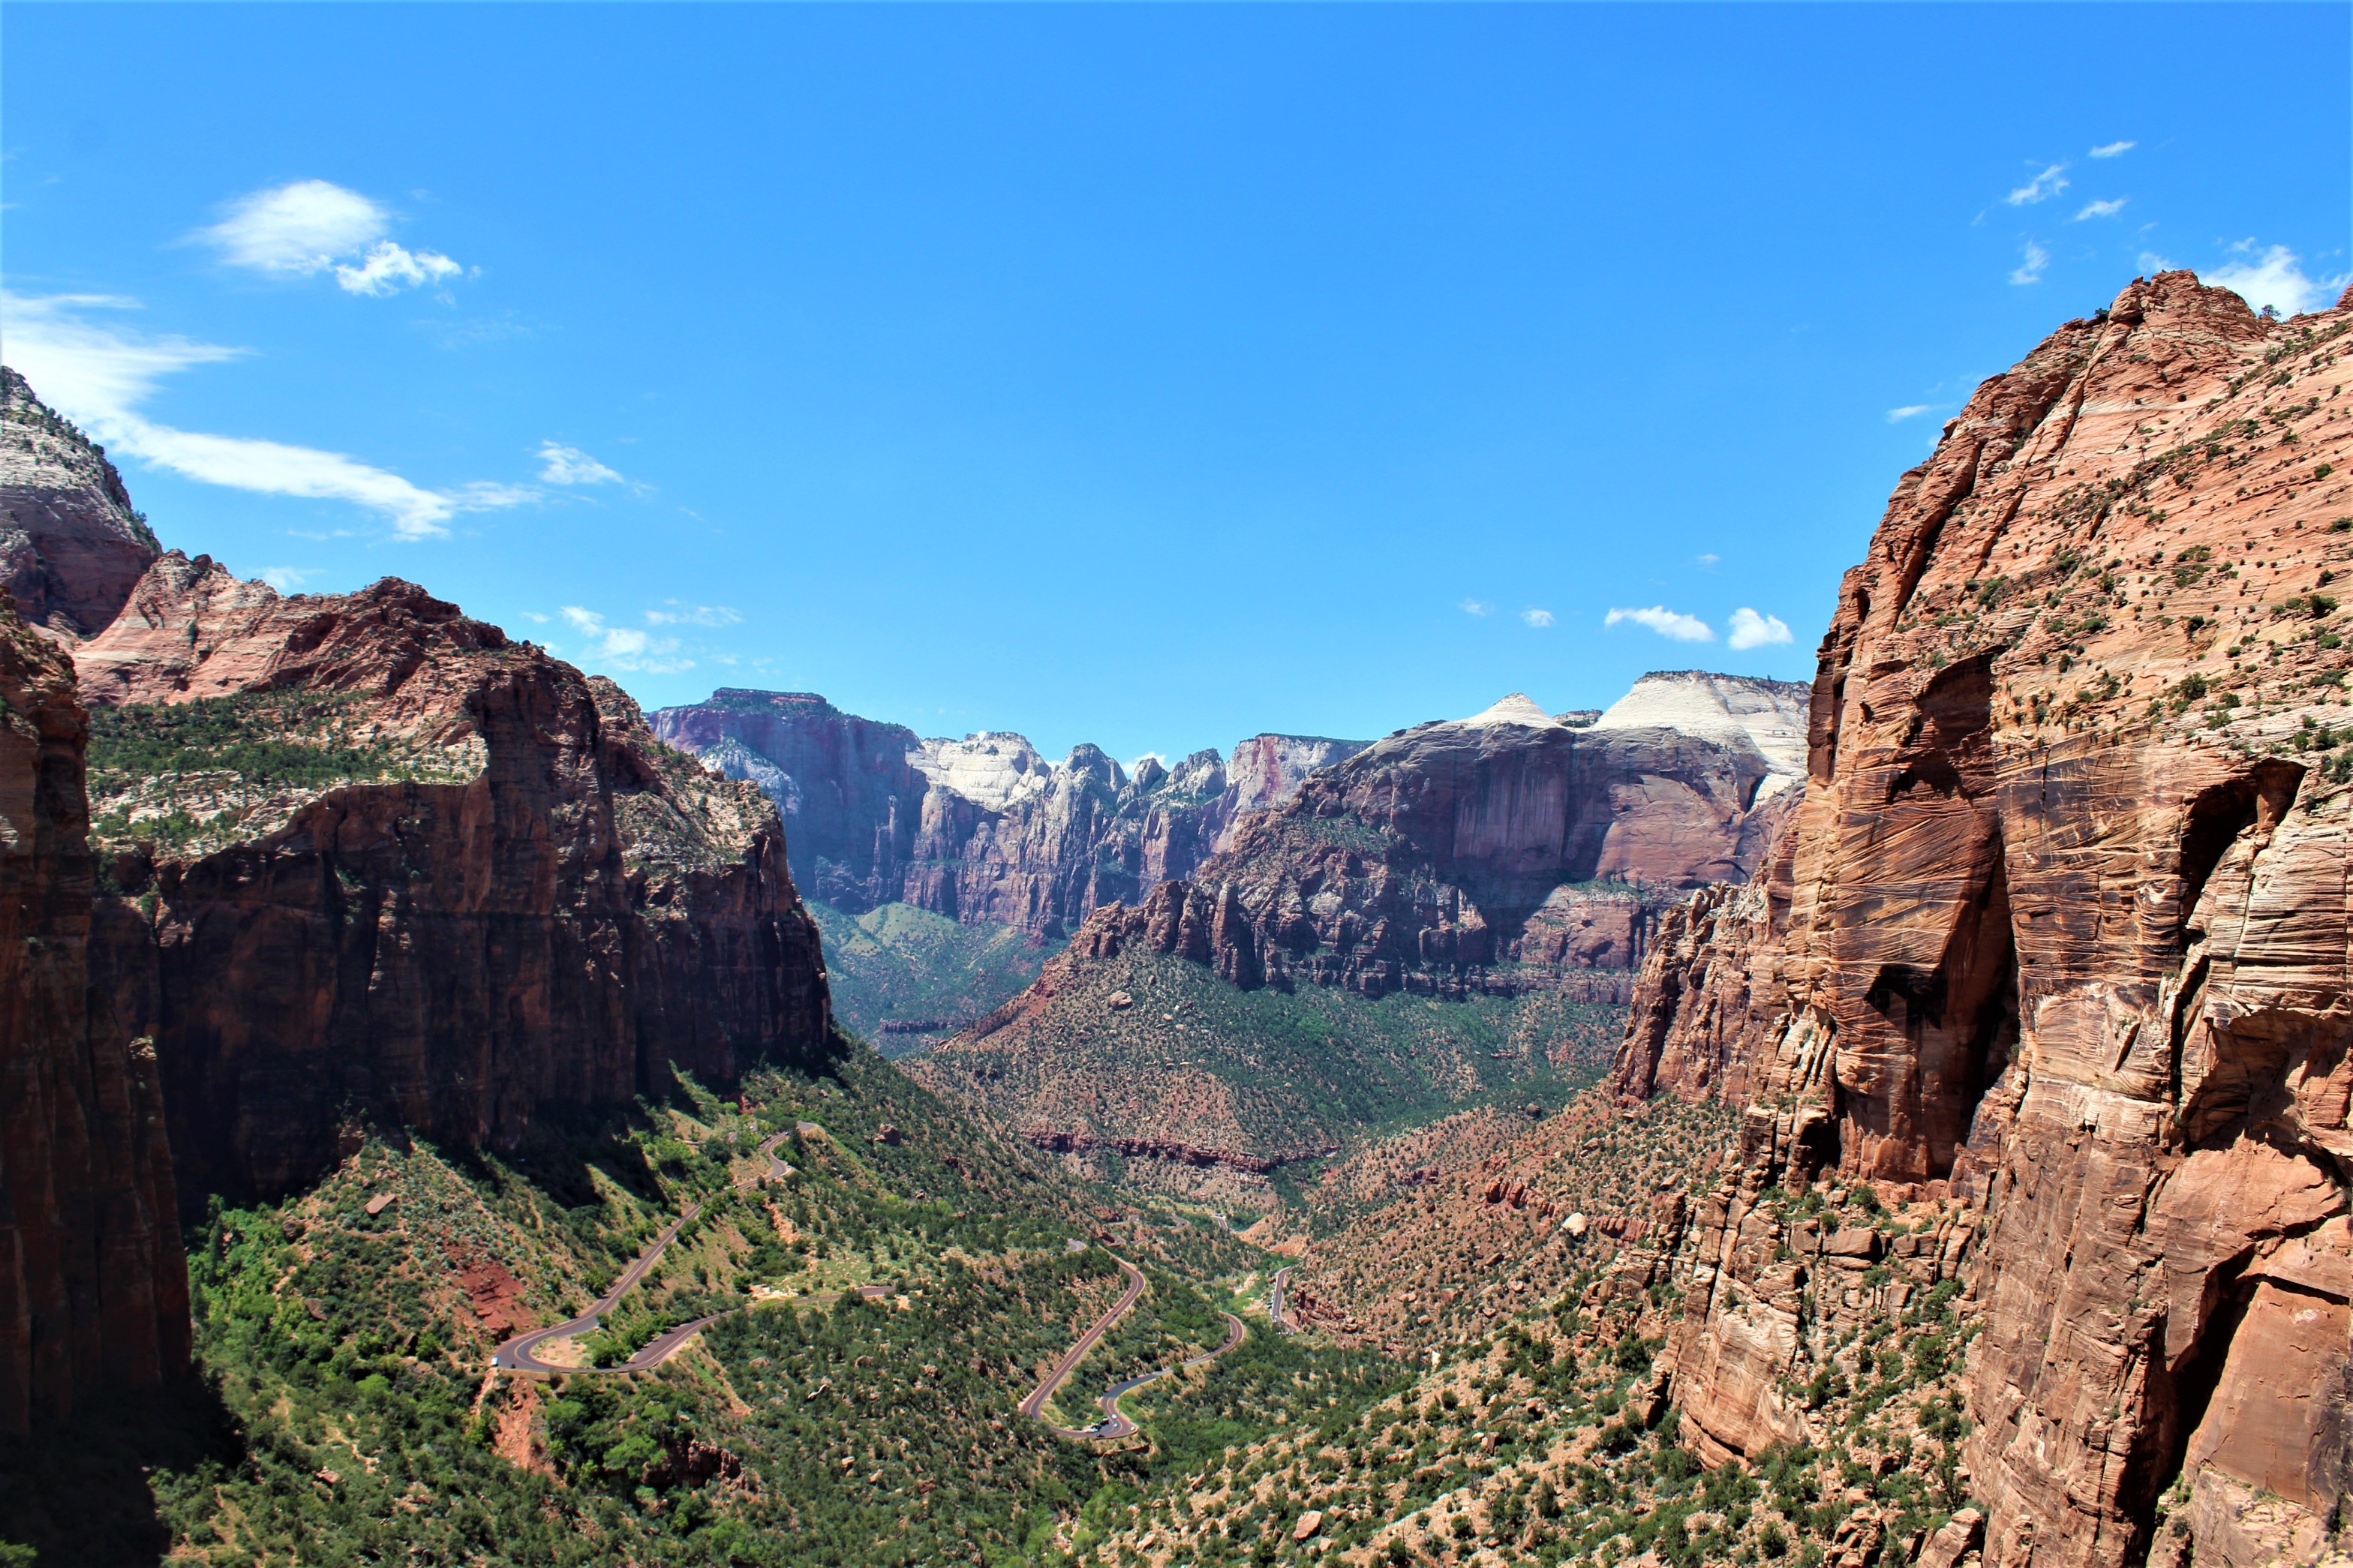 Where to Stay and Hike Visiting Zion – Custom Travel Planning Service